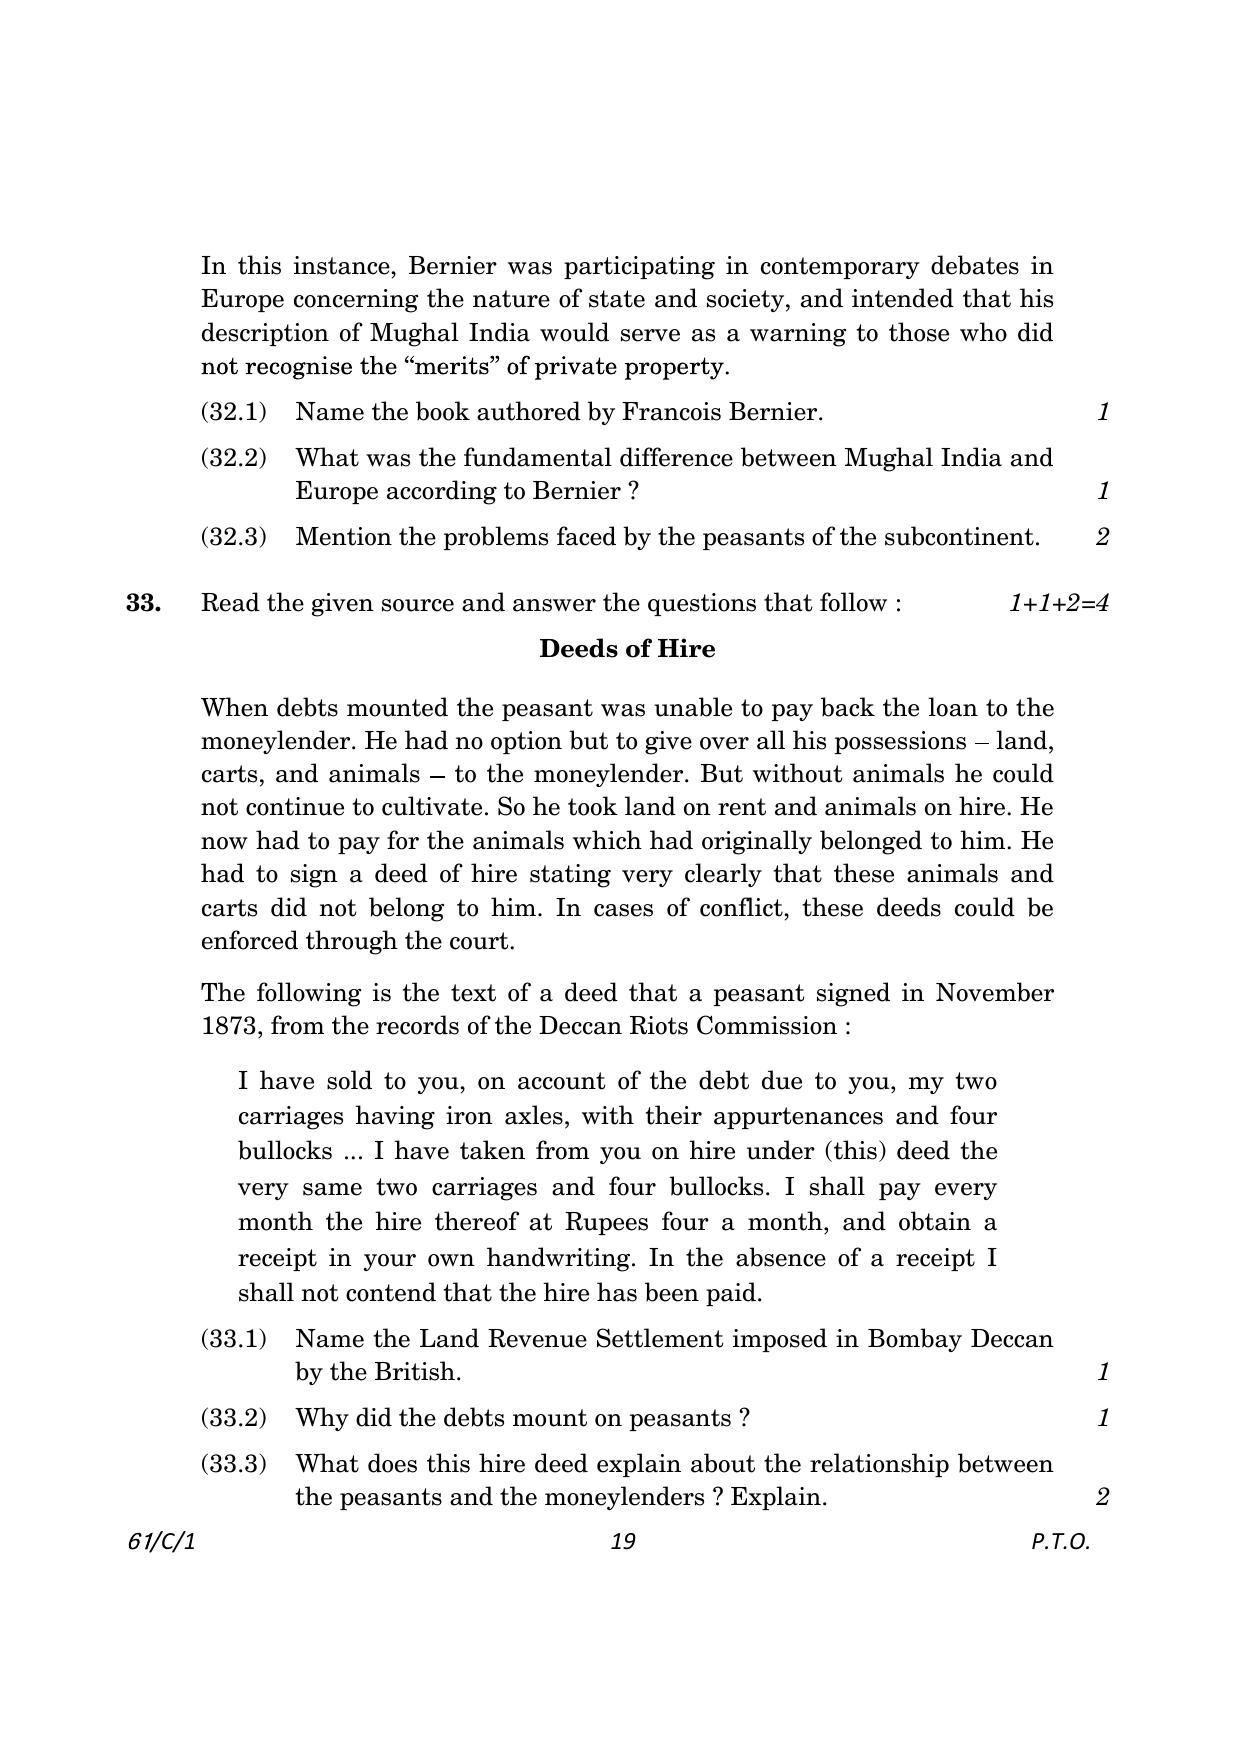 CBSE Class 12 61-1 History 2023 (Compartment) Question Paper - Page 19